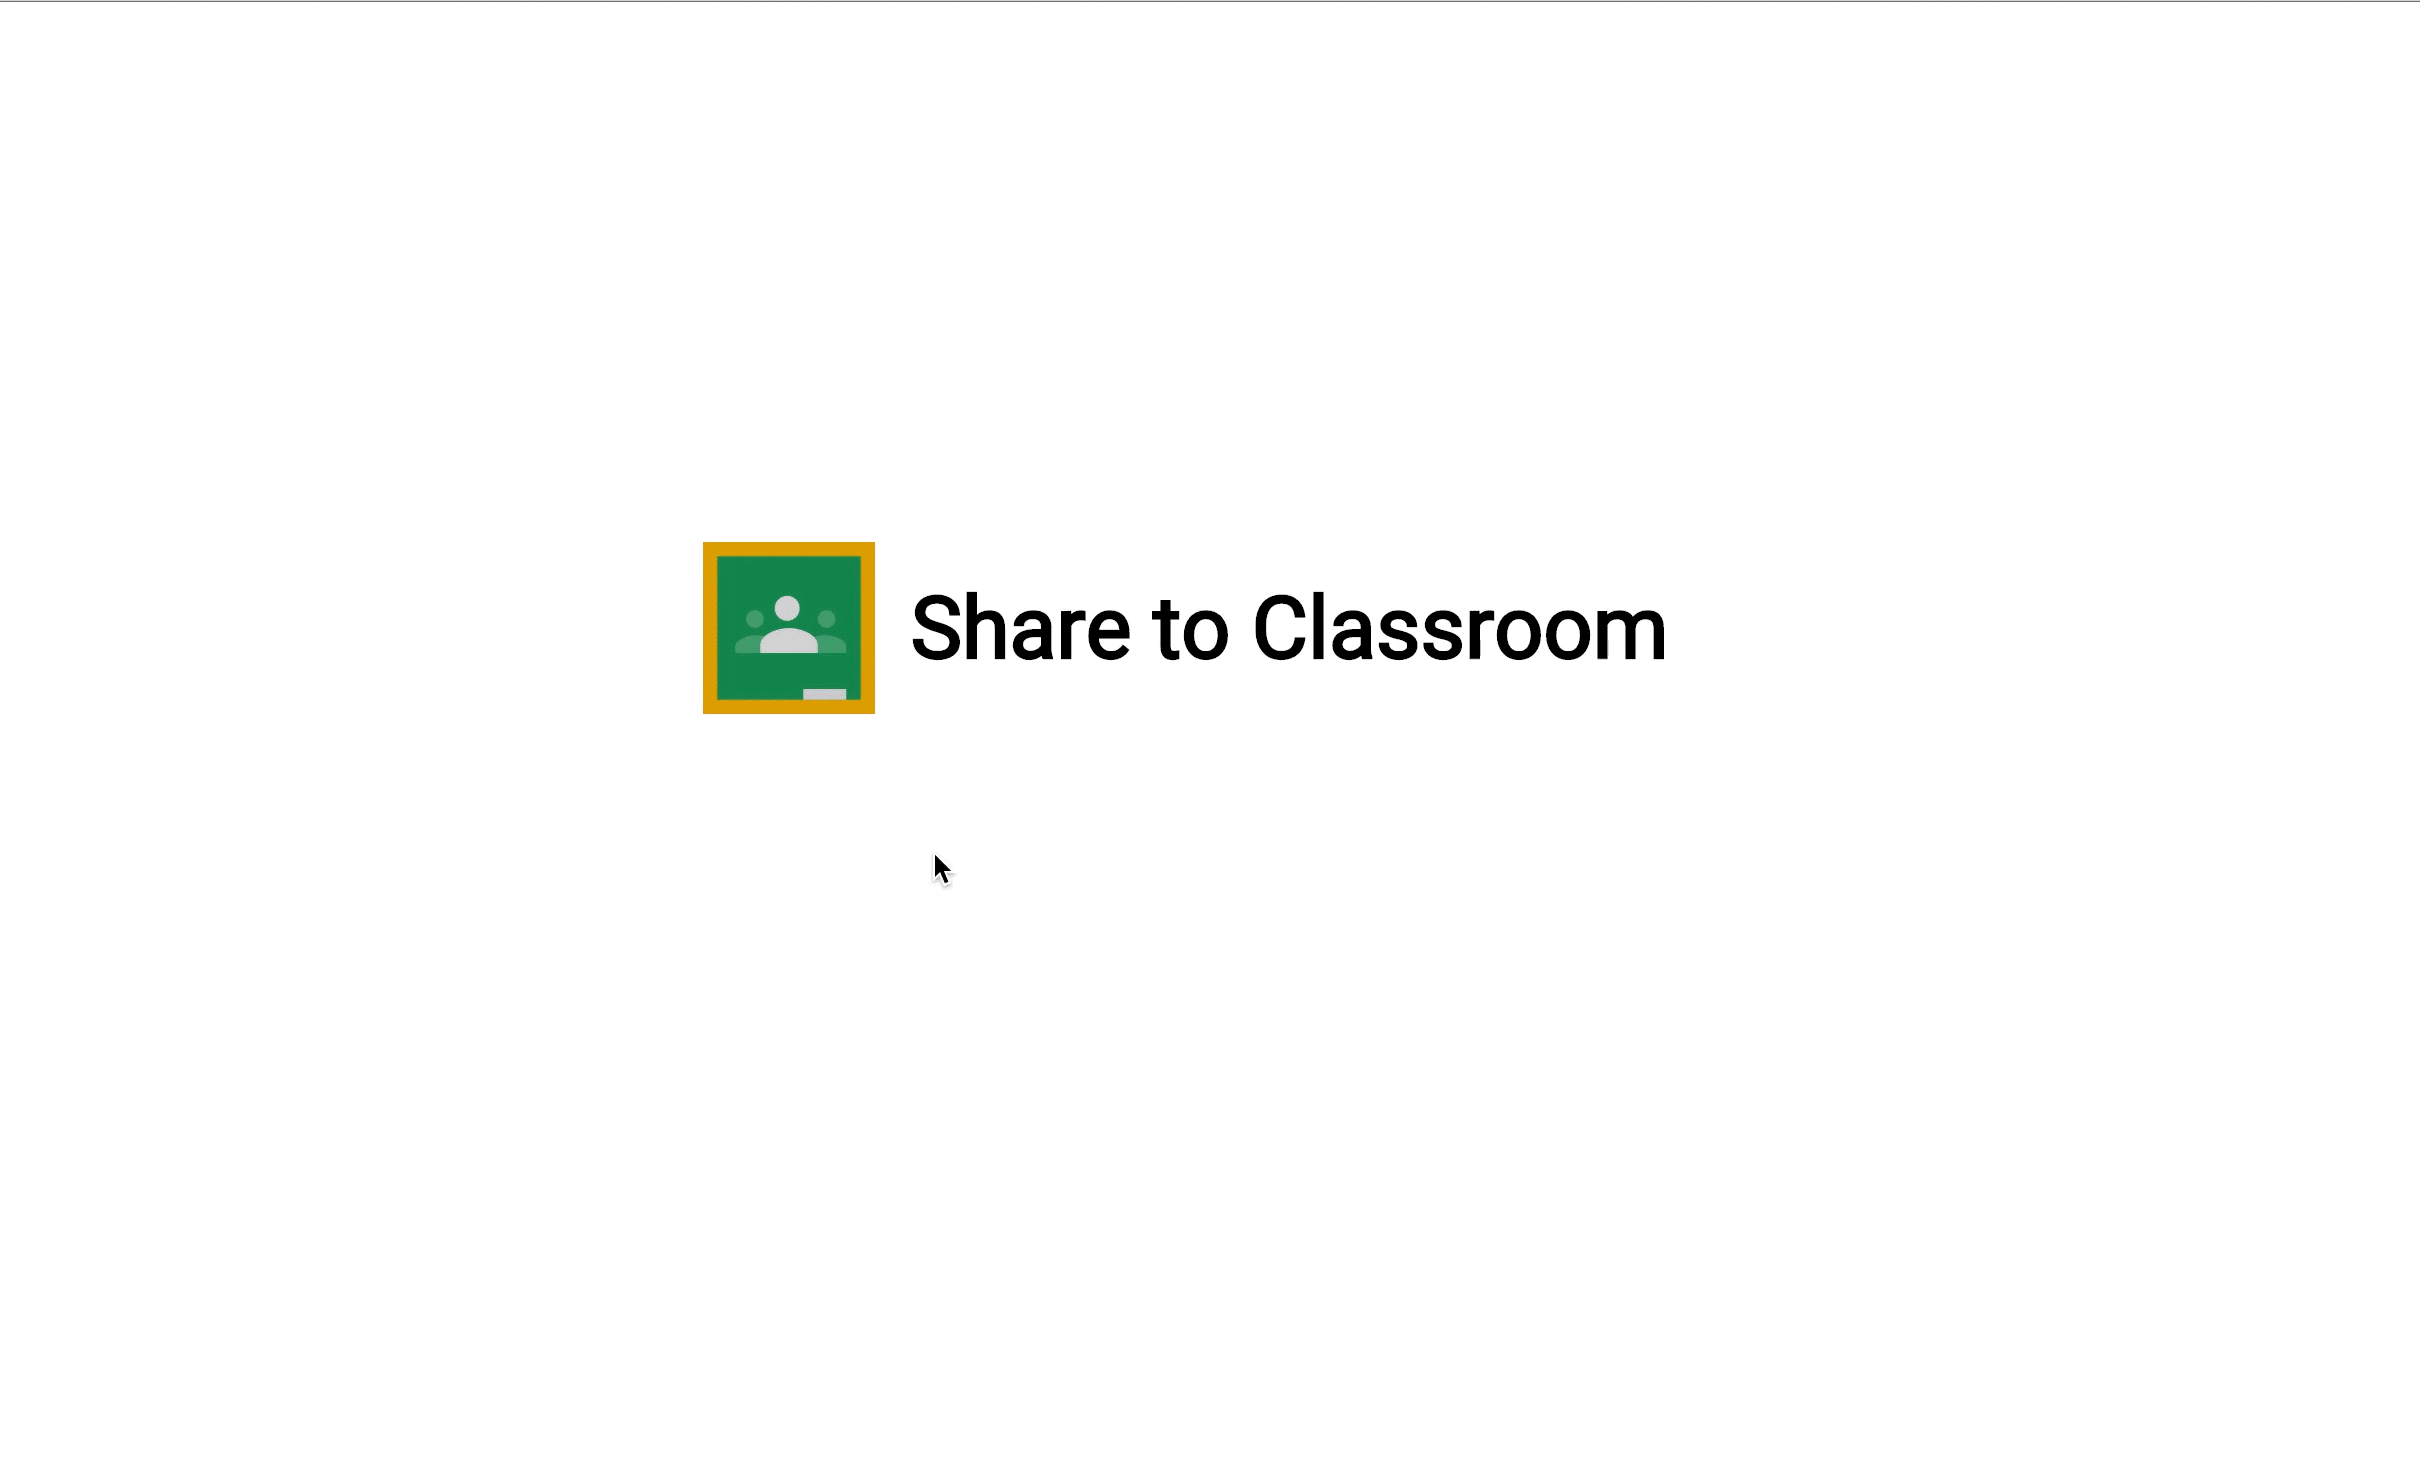 The Classroom Share Button